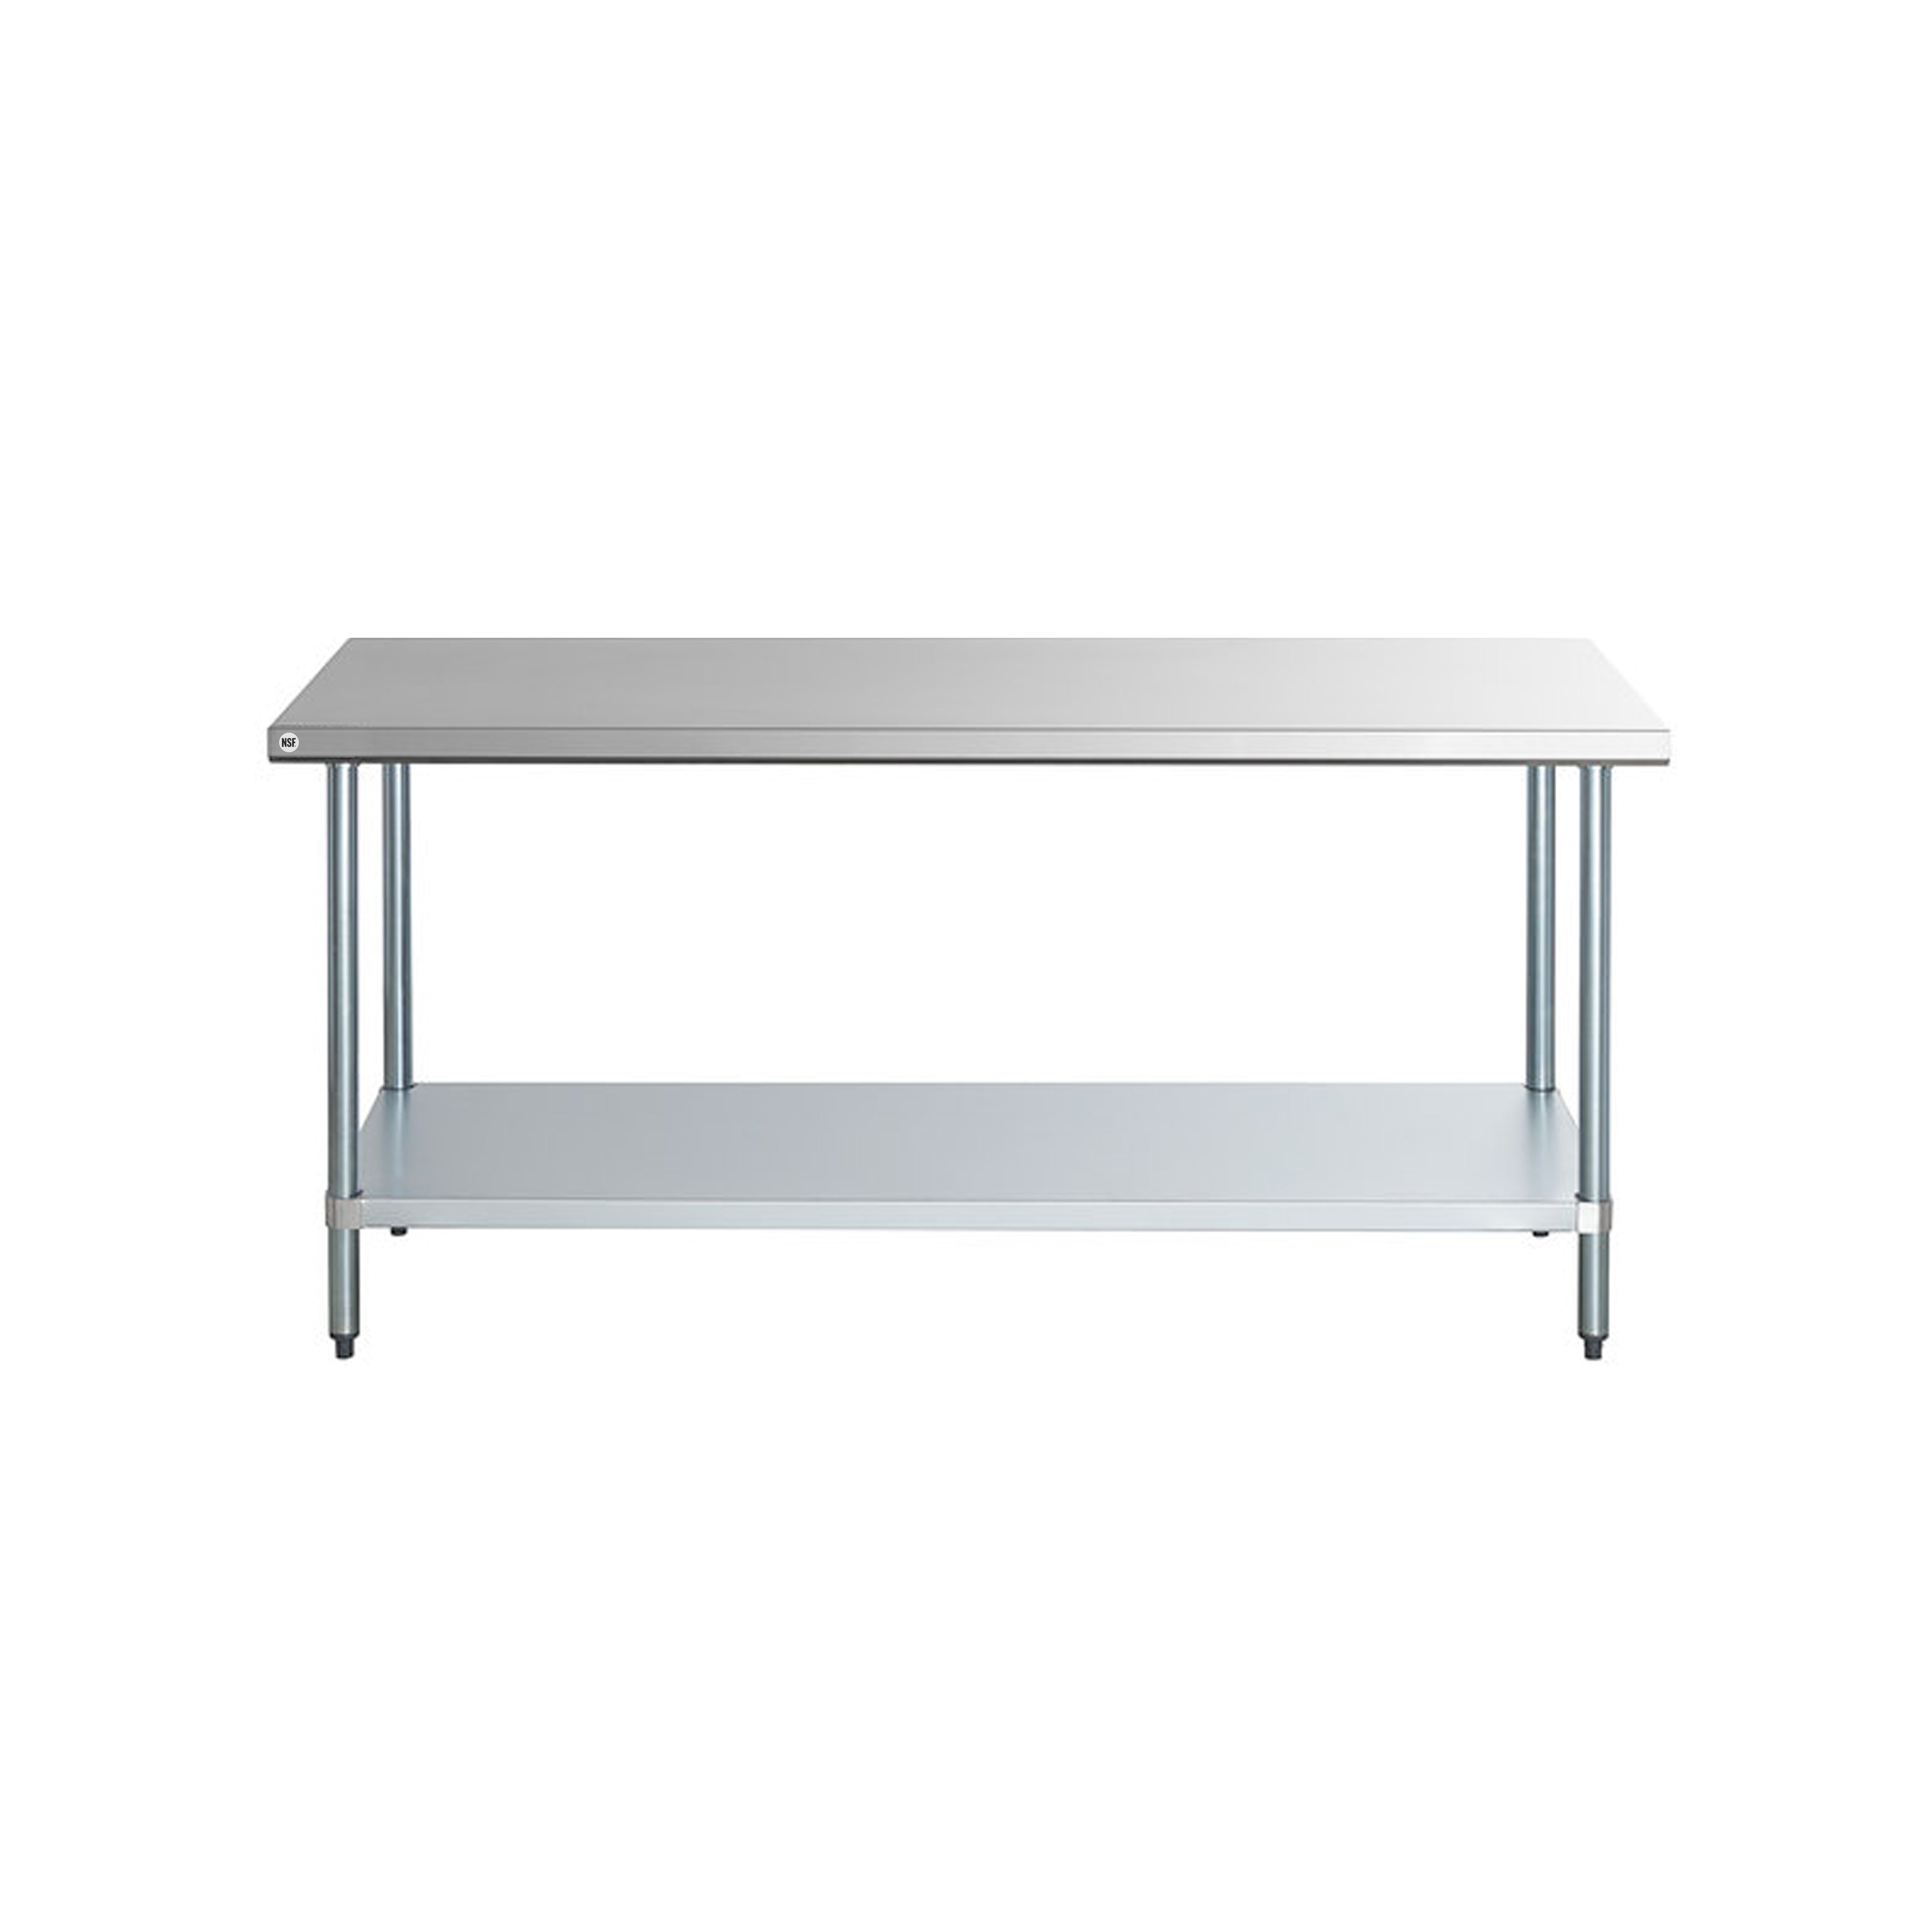 Omcan - 23182, Commercial 24" x 18" Stainless Steel Kitchen Work Table 390lbs Light Duty